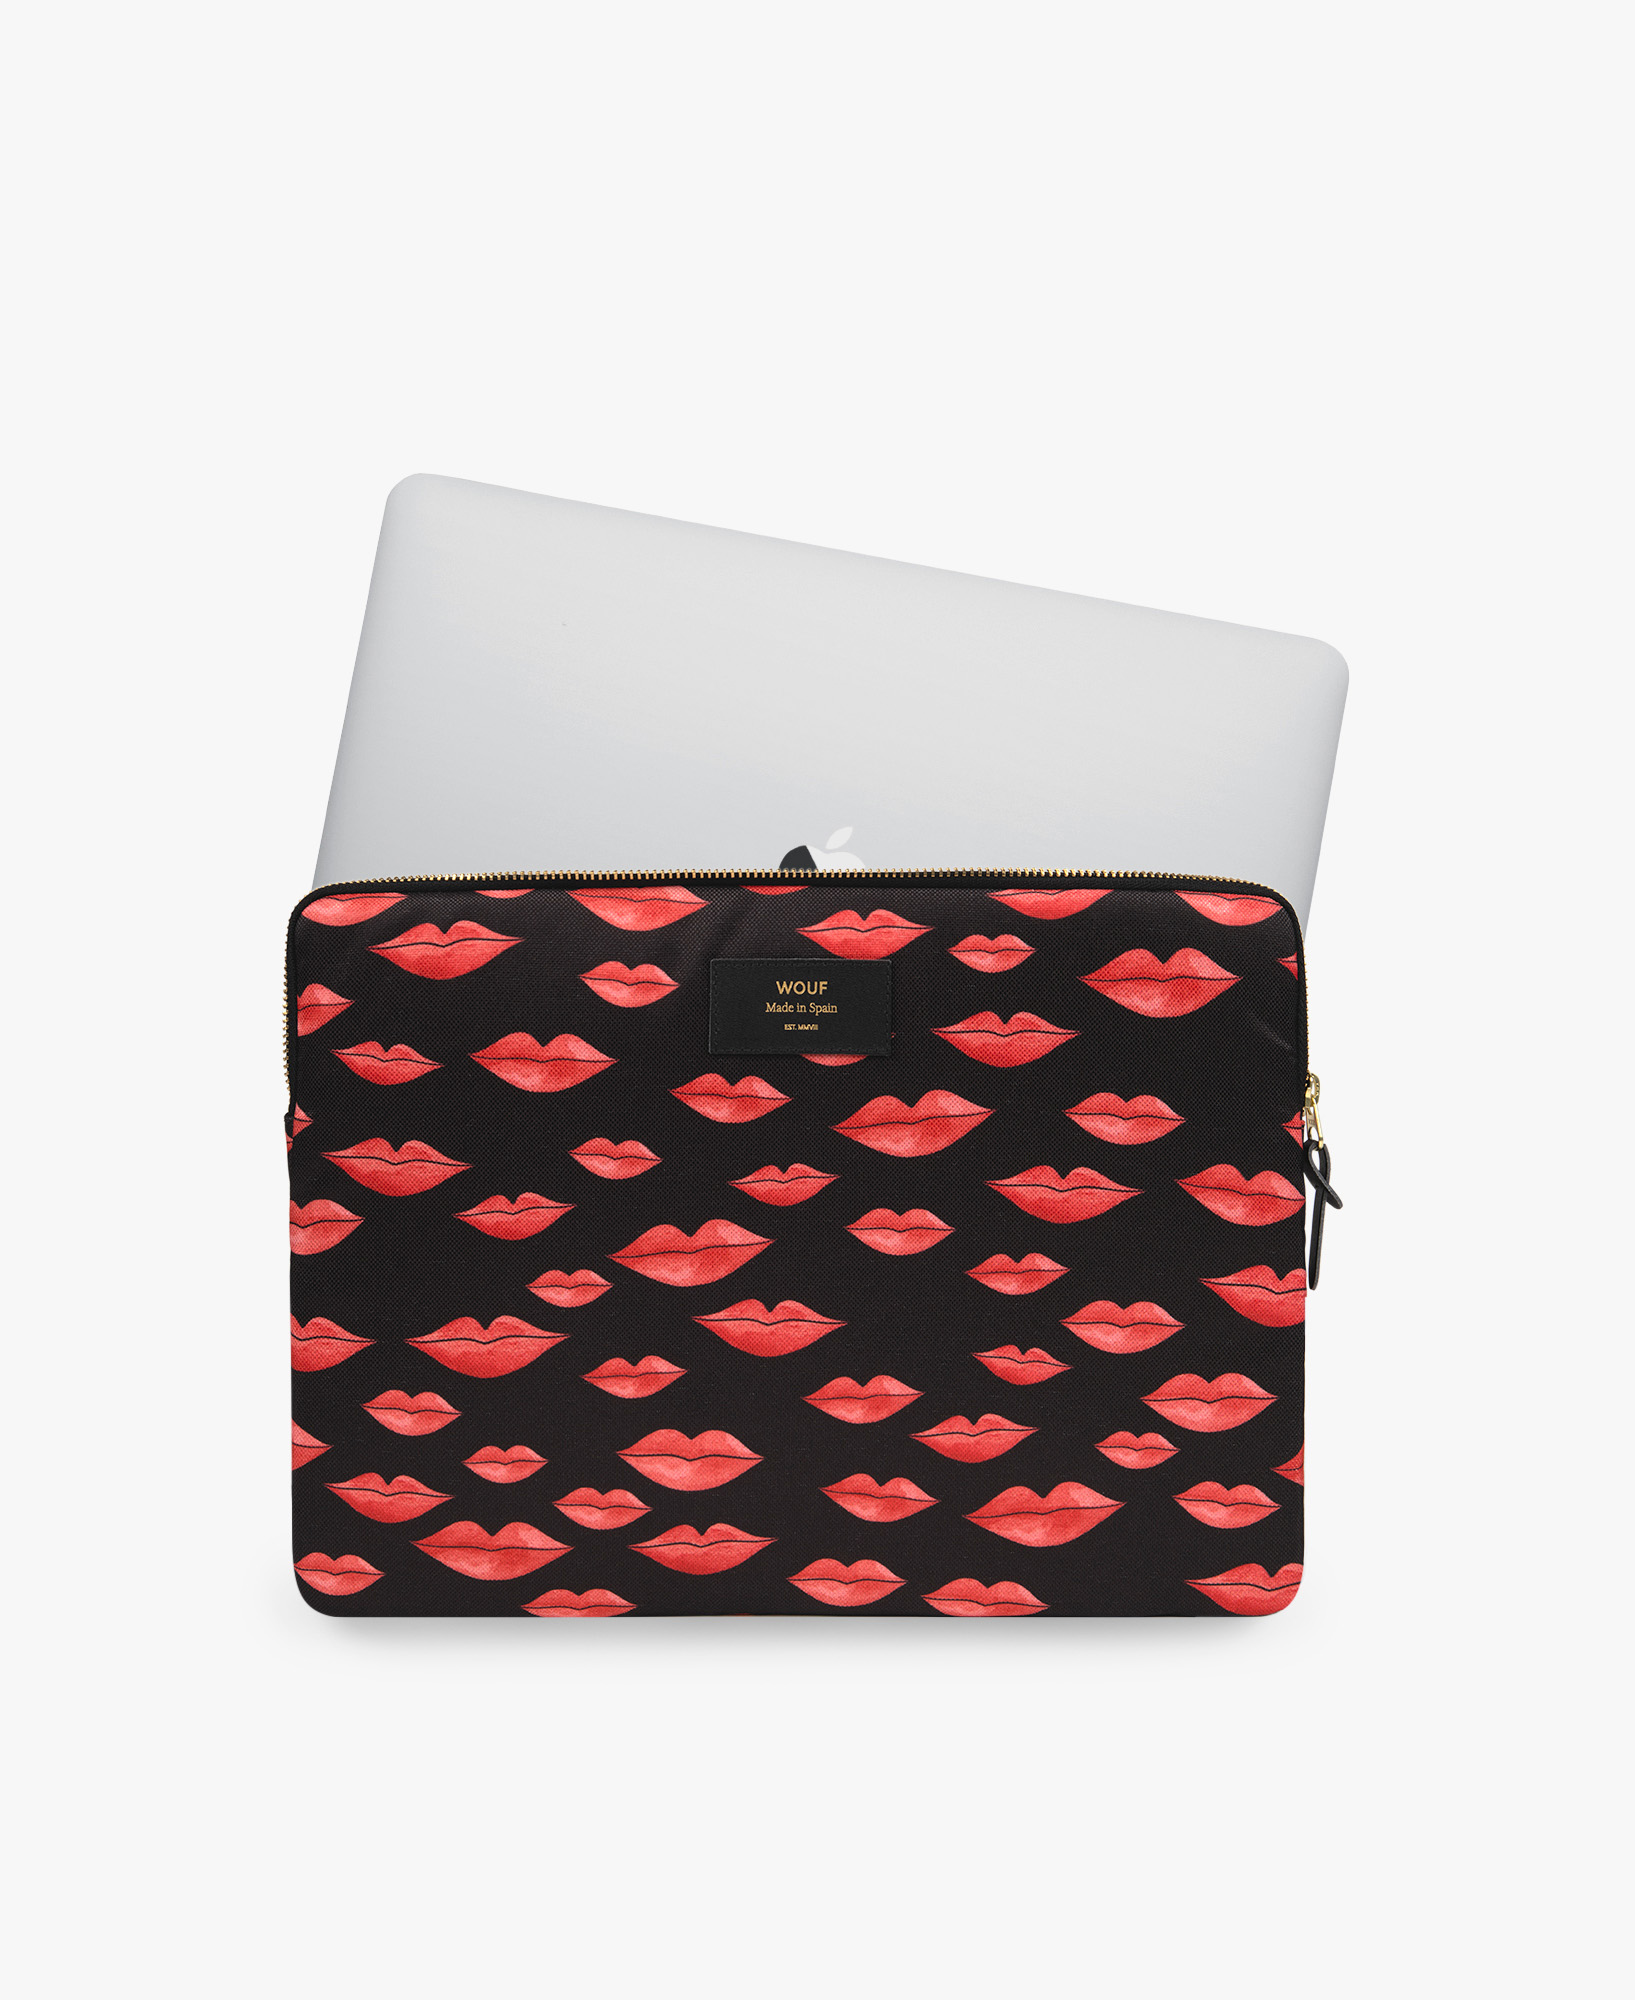 WOUF-13-Laptop-Sleeve-Beso-Usage